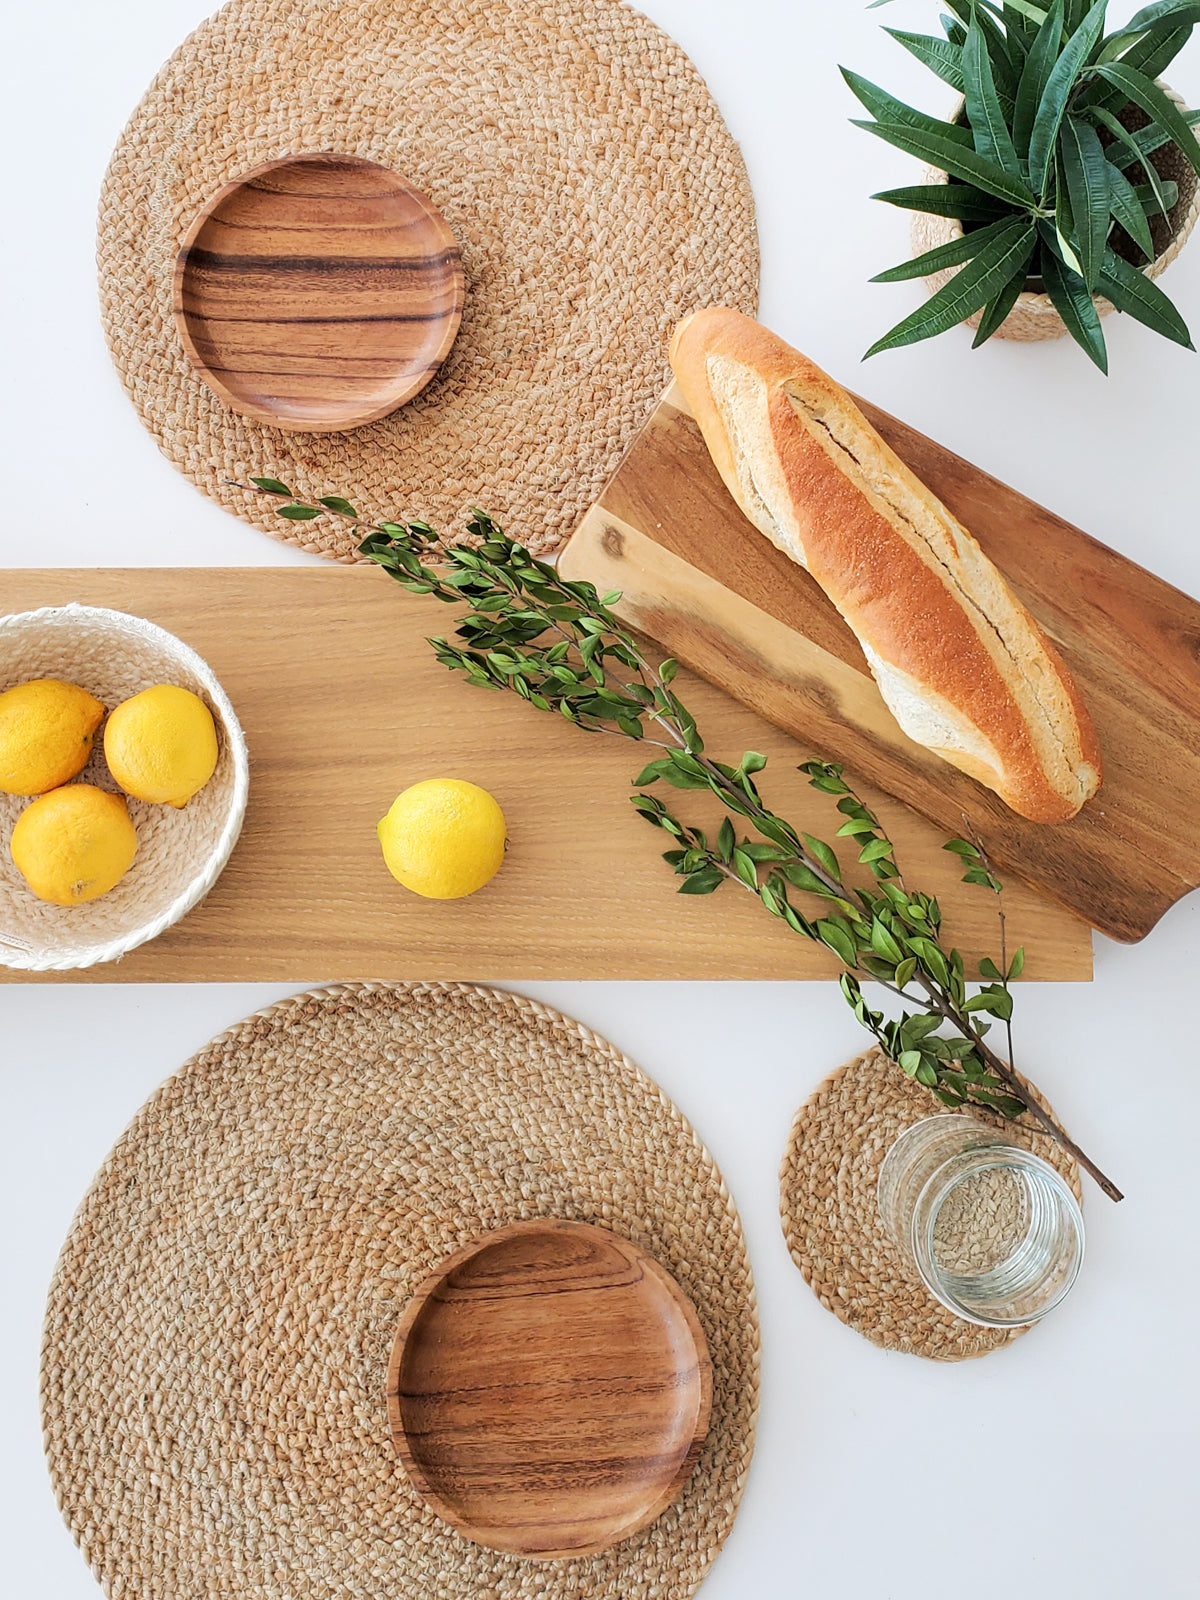 Natural textures and neutral color handwoven placemats, bowl, coaster and Handcrafted wooden serving board 